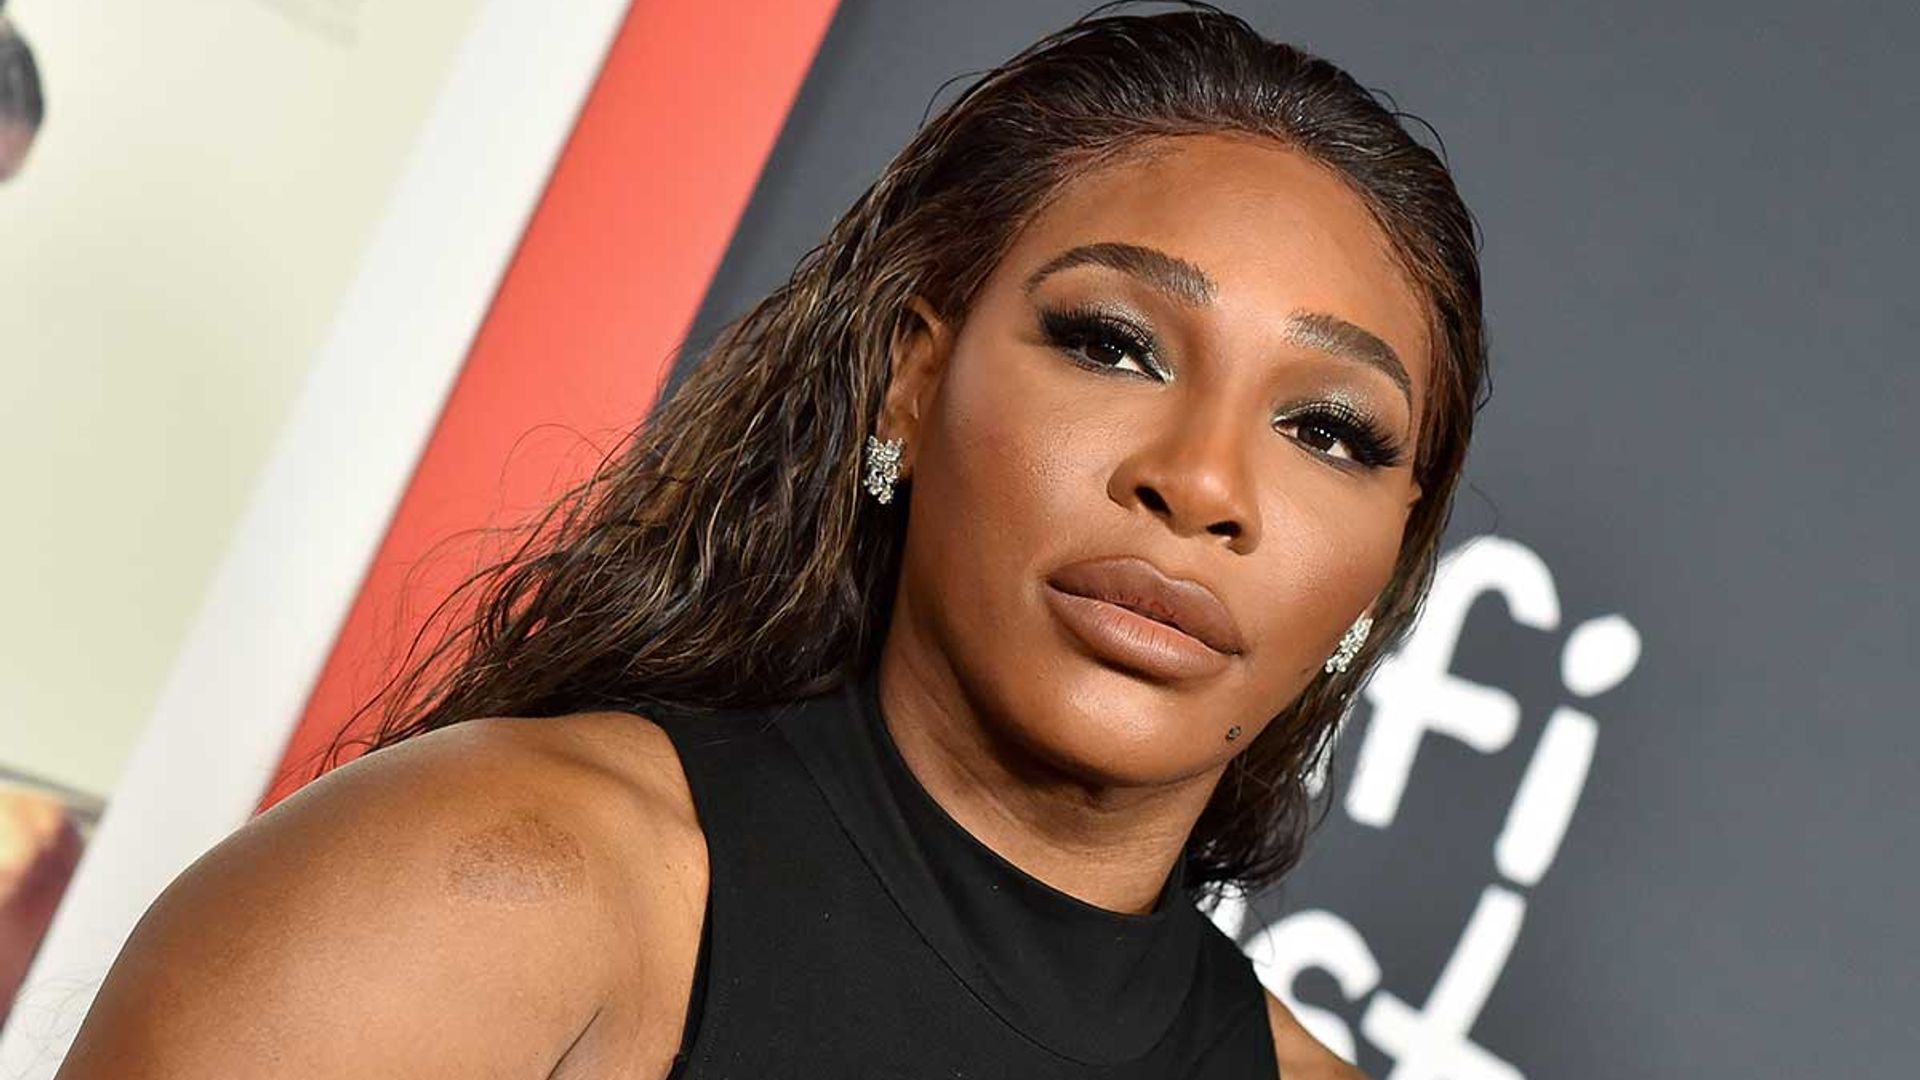 Serena Williams looks unreal in jaw-dropping new swimsuit photo